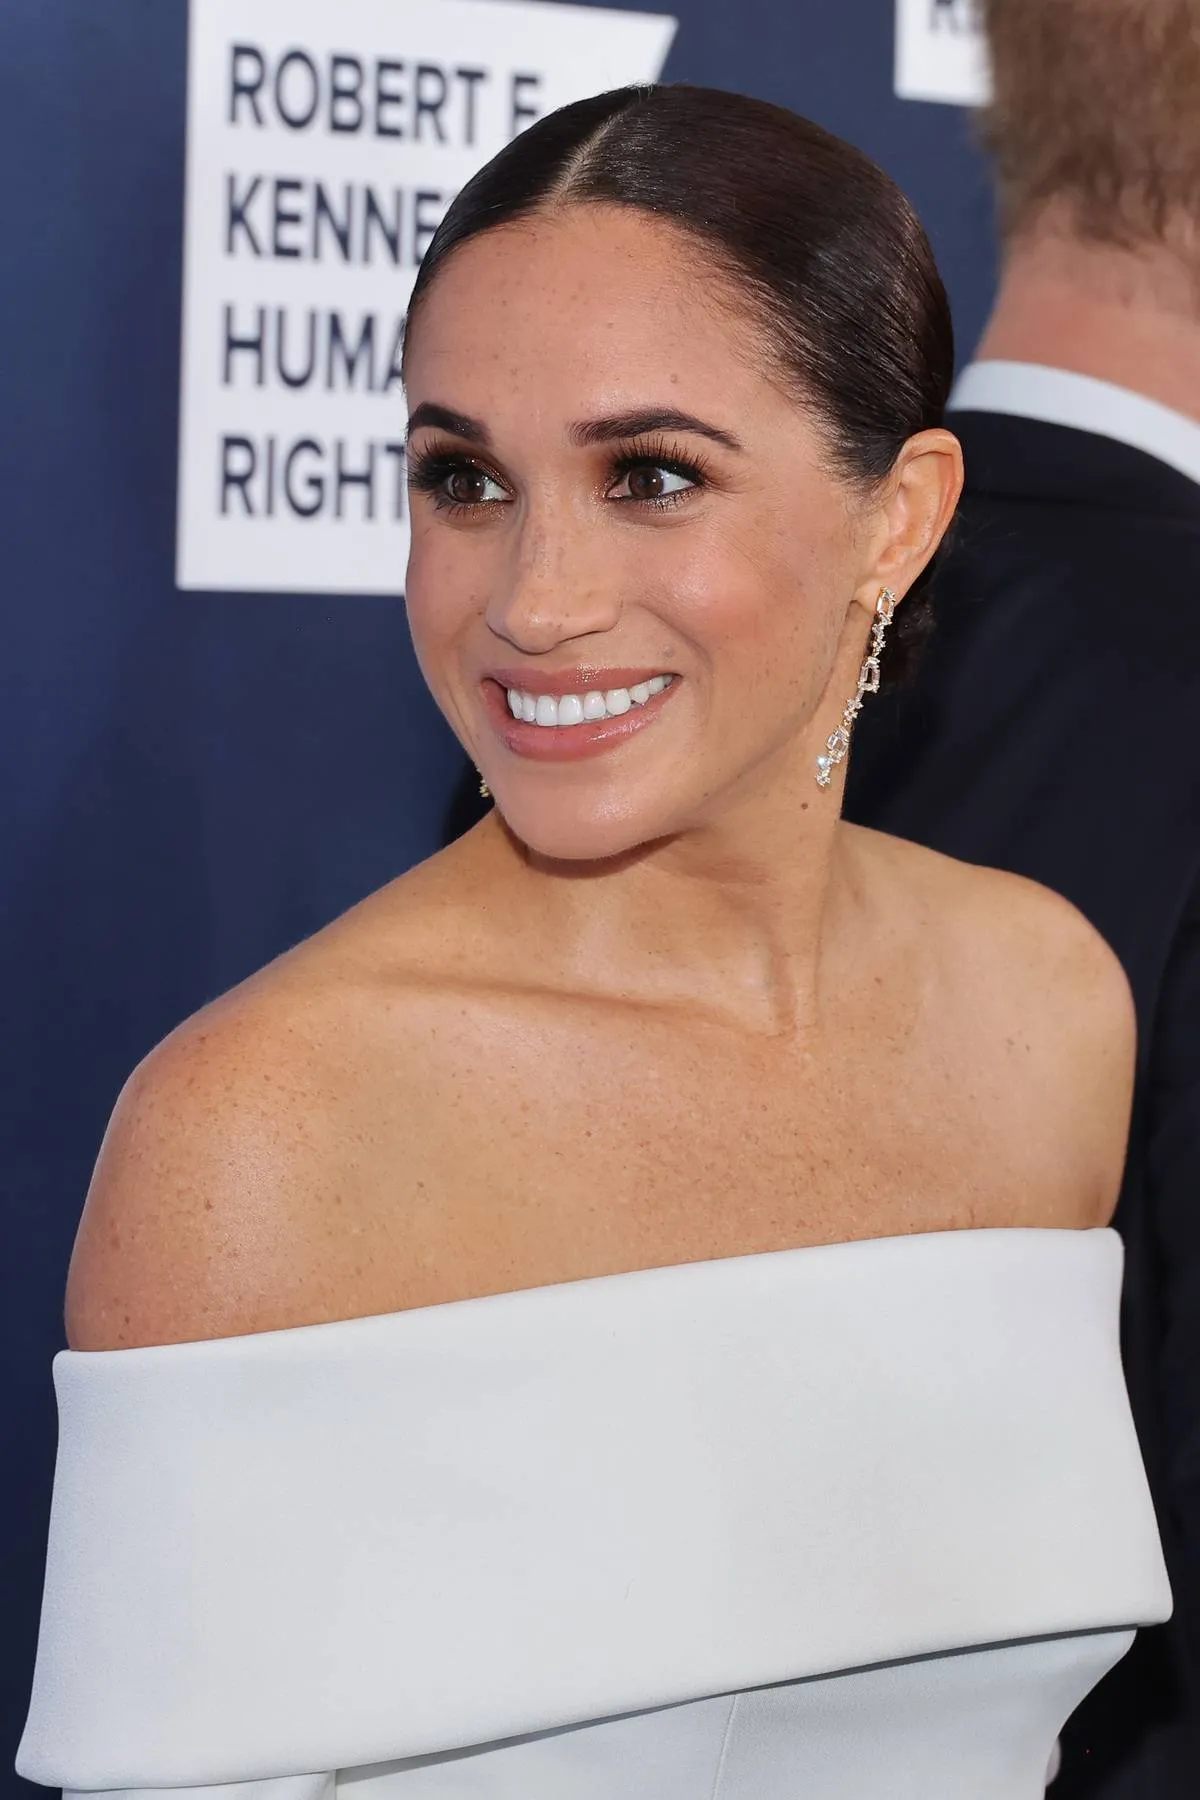 Meghan, Duchess of Sussex attends the 2022 Robert F. Kennedy Human  Rights Ripple of Hope Gala at New York Hilton on December 06, 2022 in 
New York City.